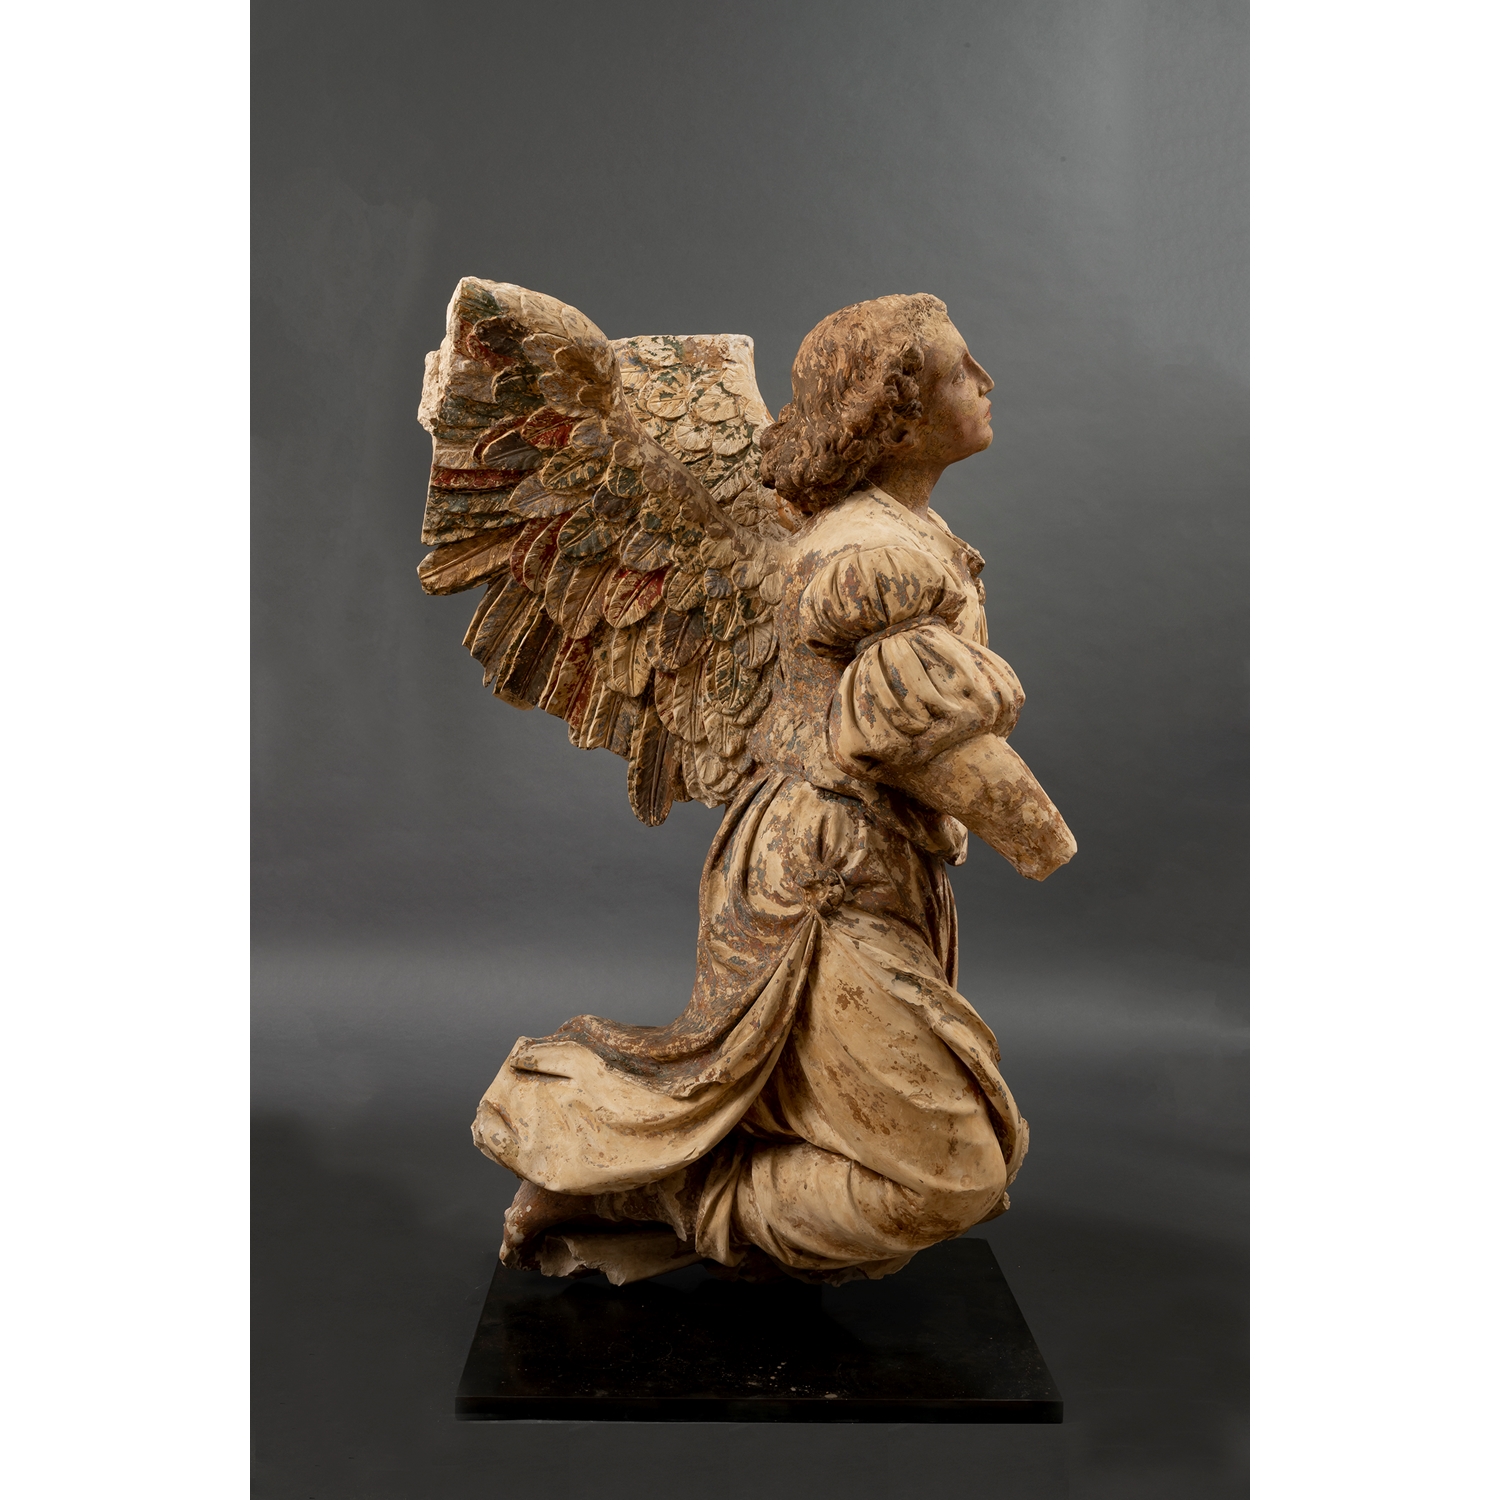 IMPORTANT PAIR OF FRENCH RENAISSANCE ANGELS - SOLD